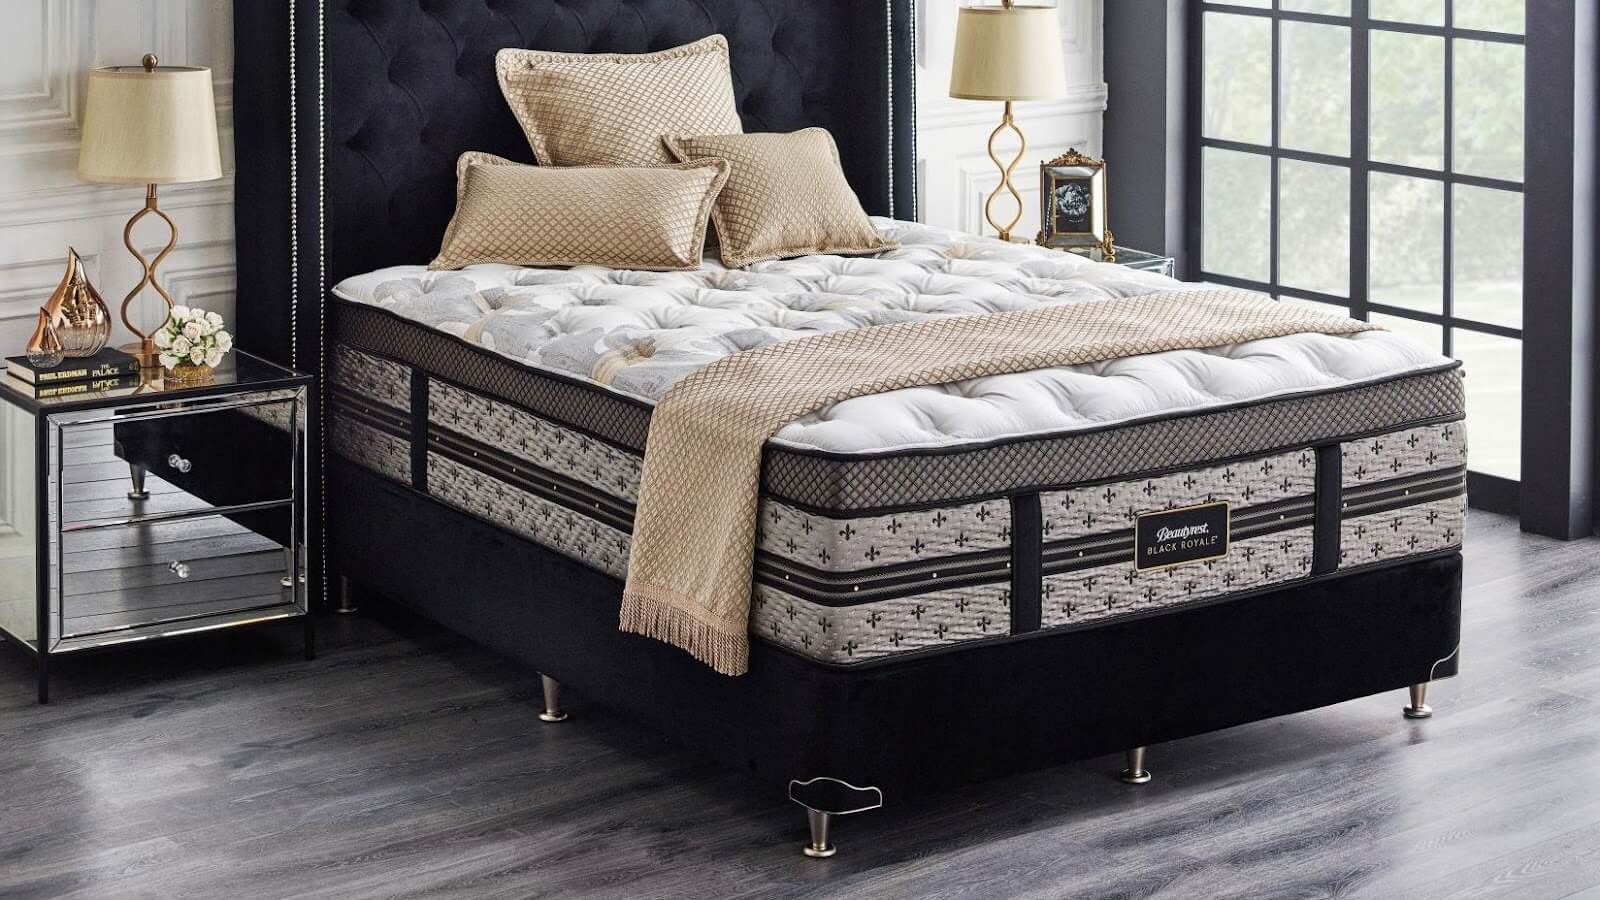 Investing in this mattress is worth your money. 